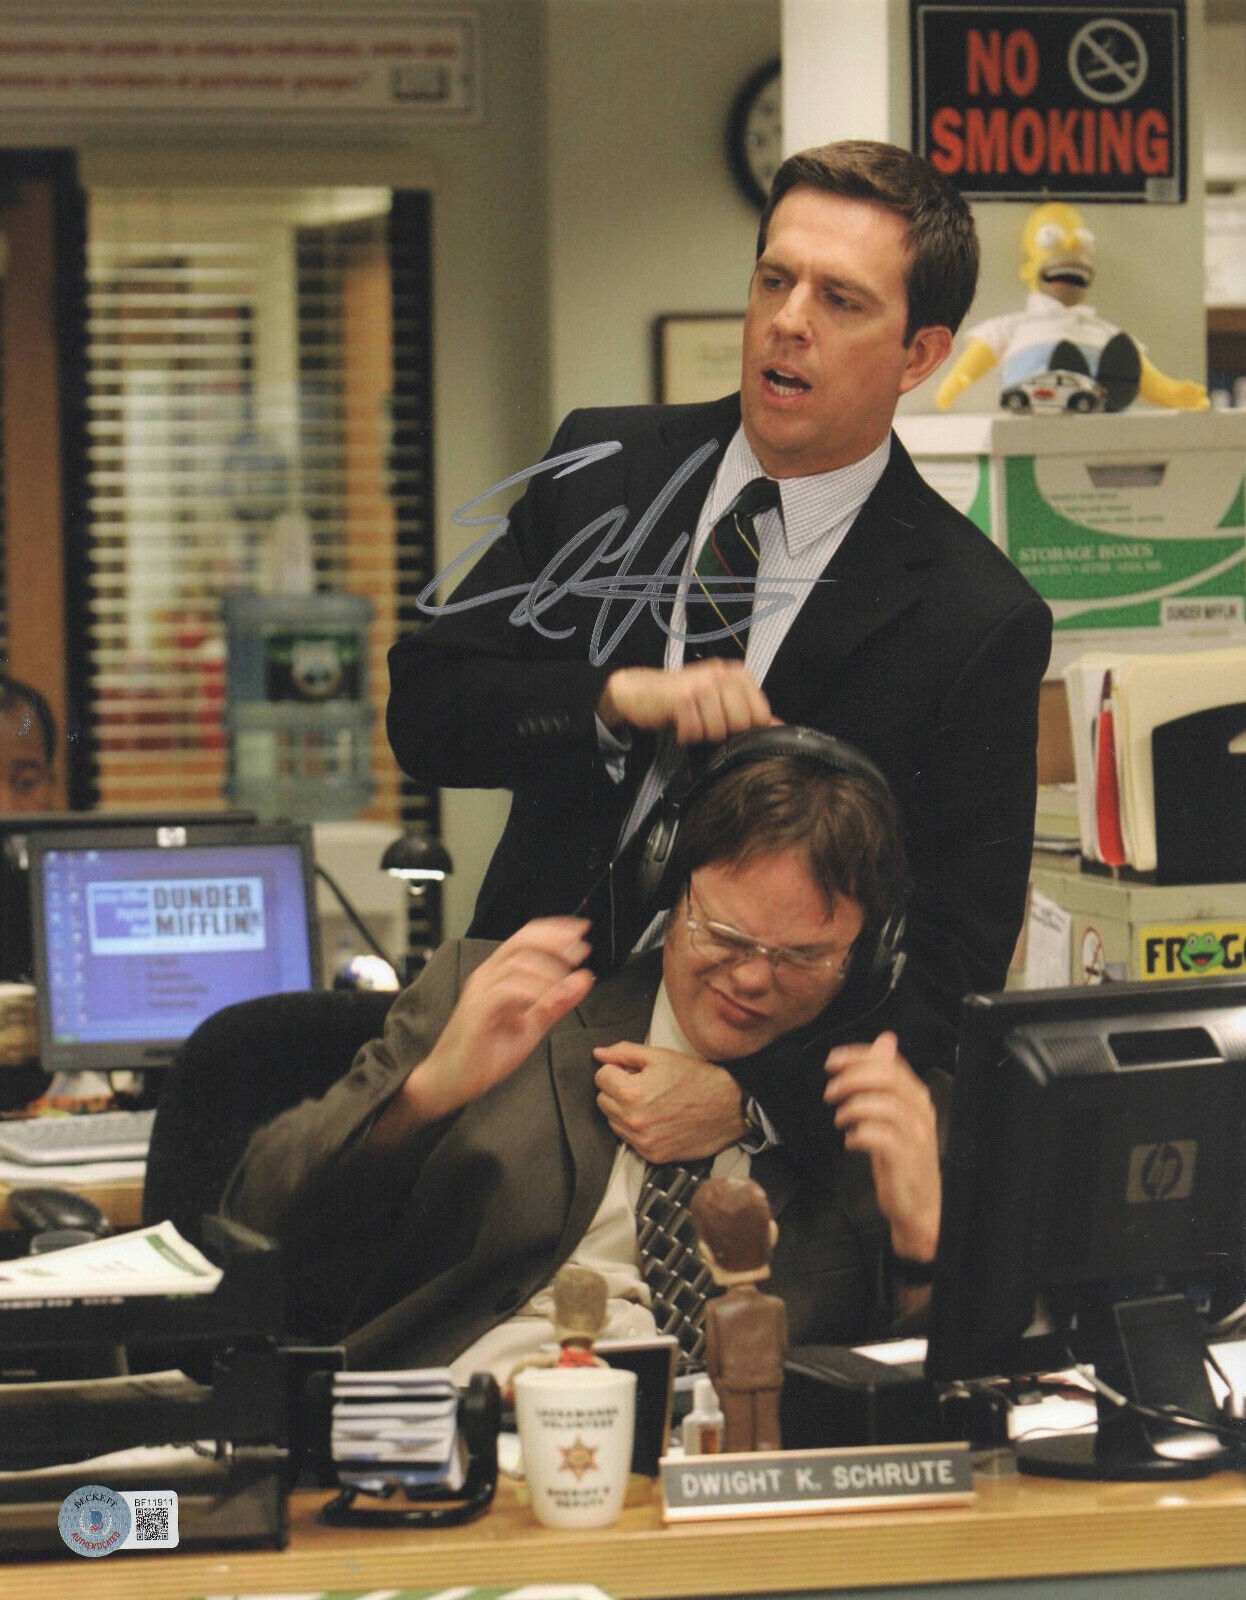 ED HELMS SIGNED AUTOGRAPH THE OFFICE 11X14 PHOTO BECKETT BAS COA ANDY